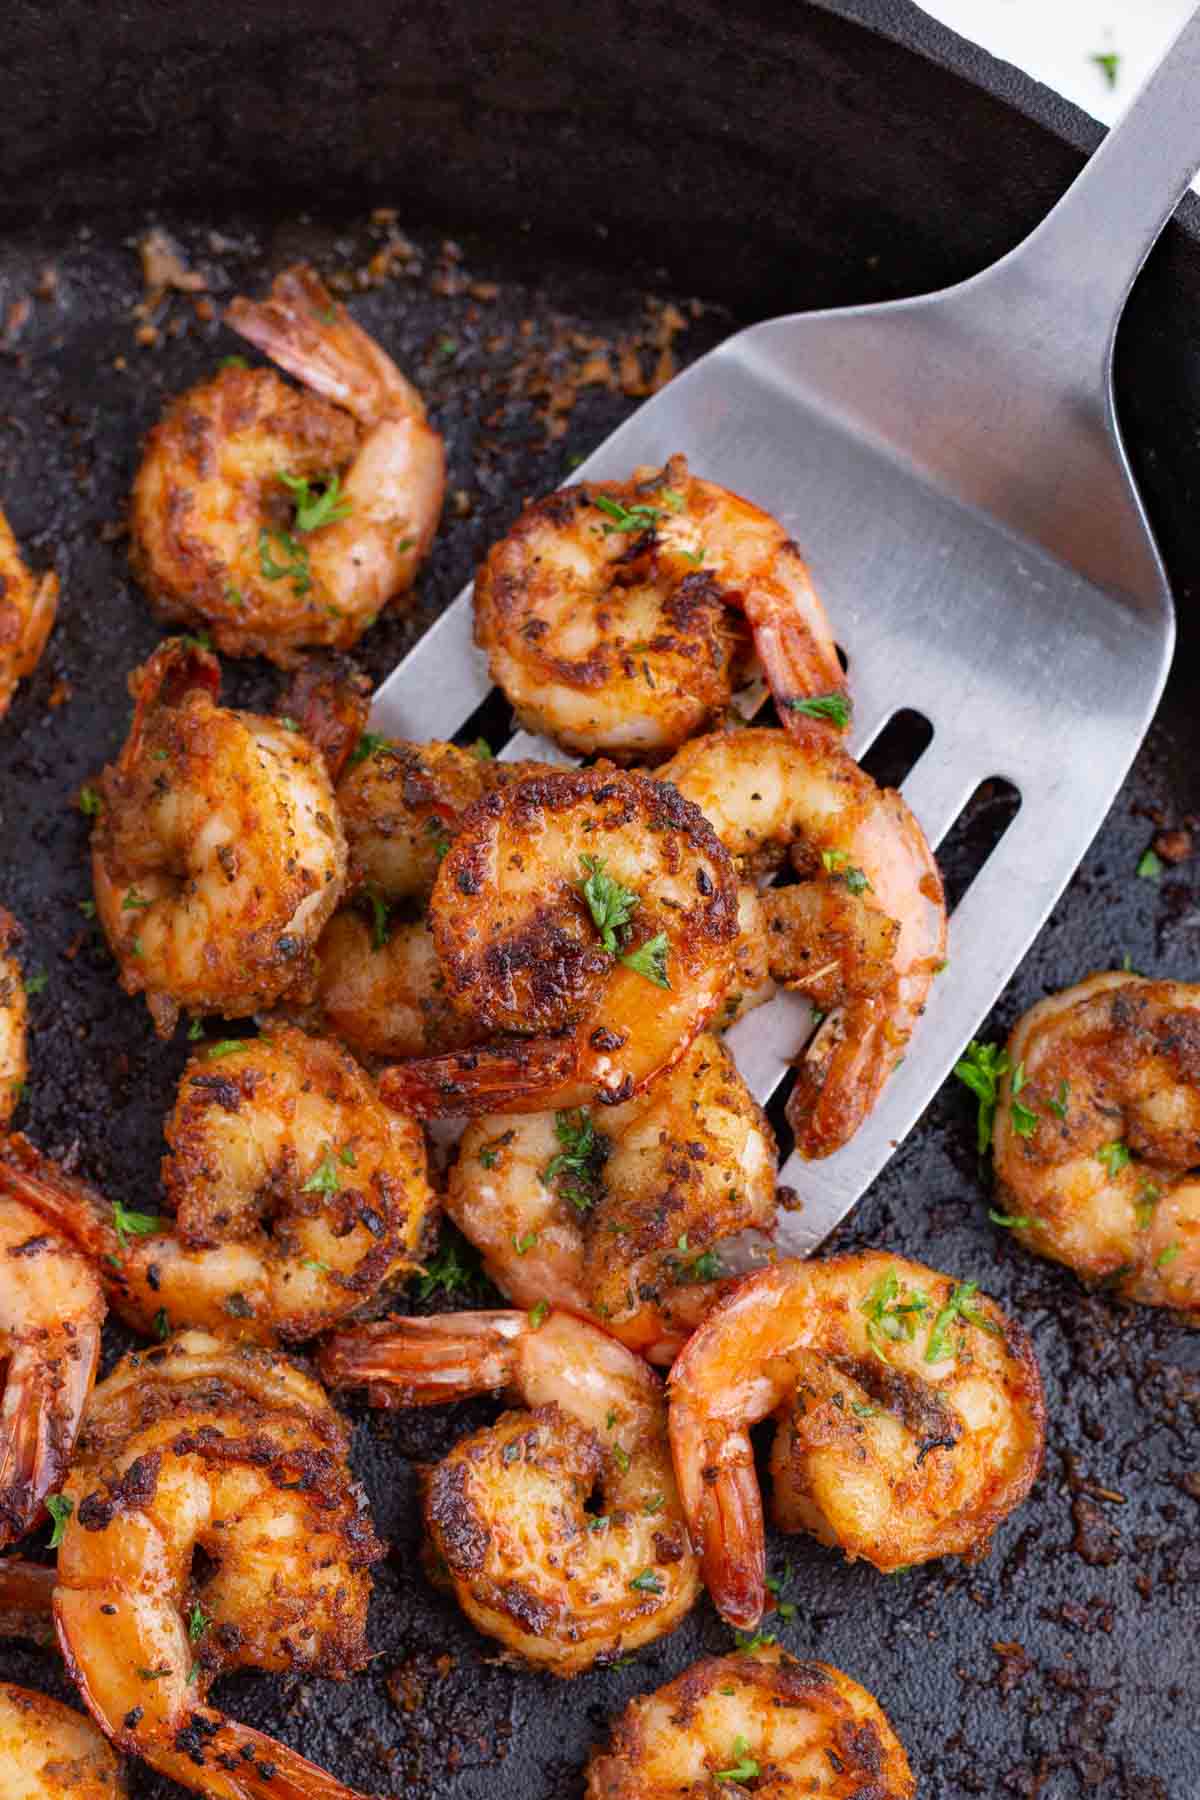 Perfectly cooked shrimp is seasoned with Cajun spices.